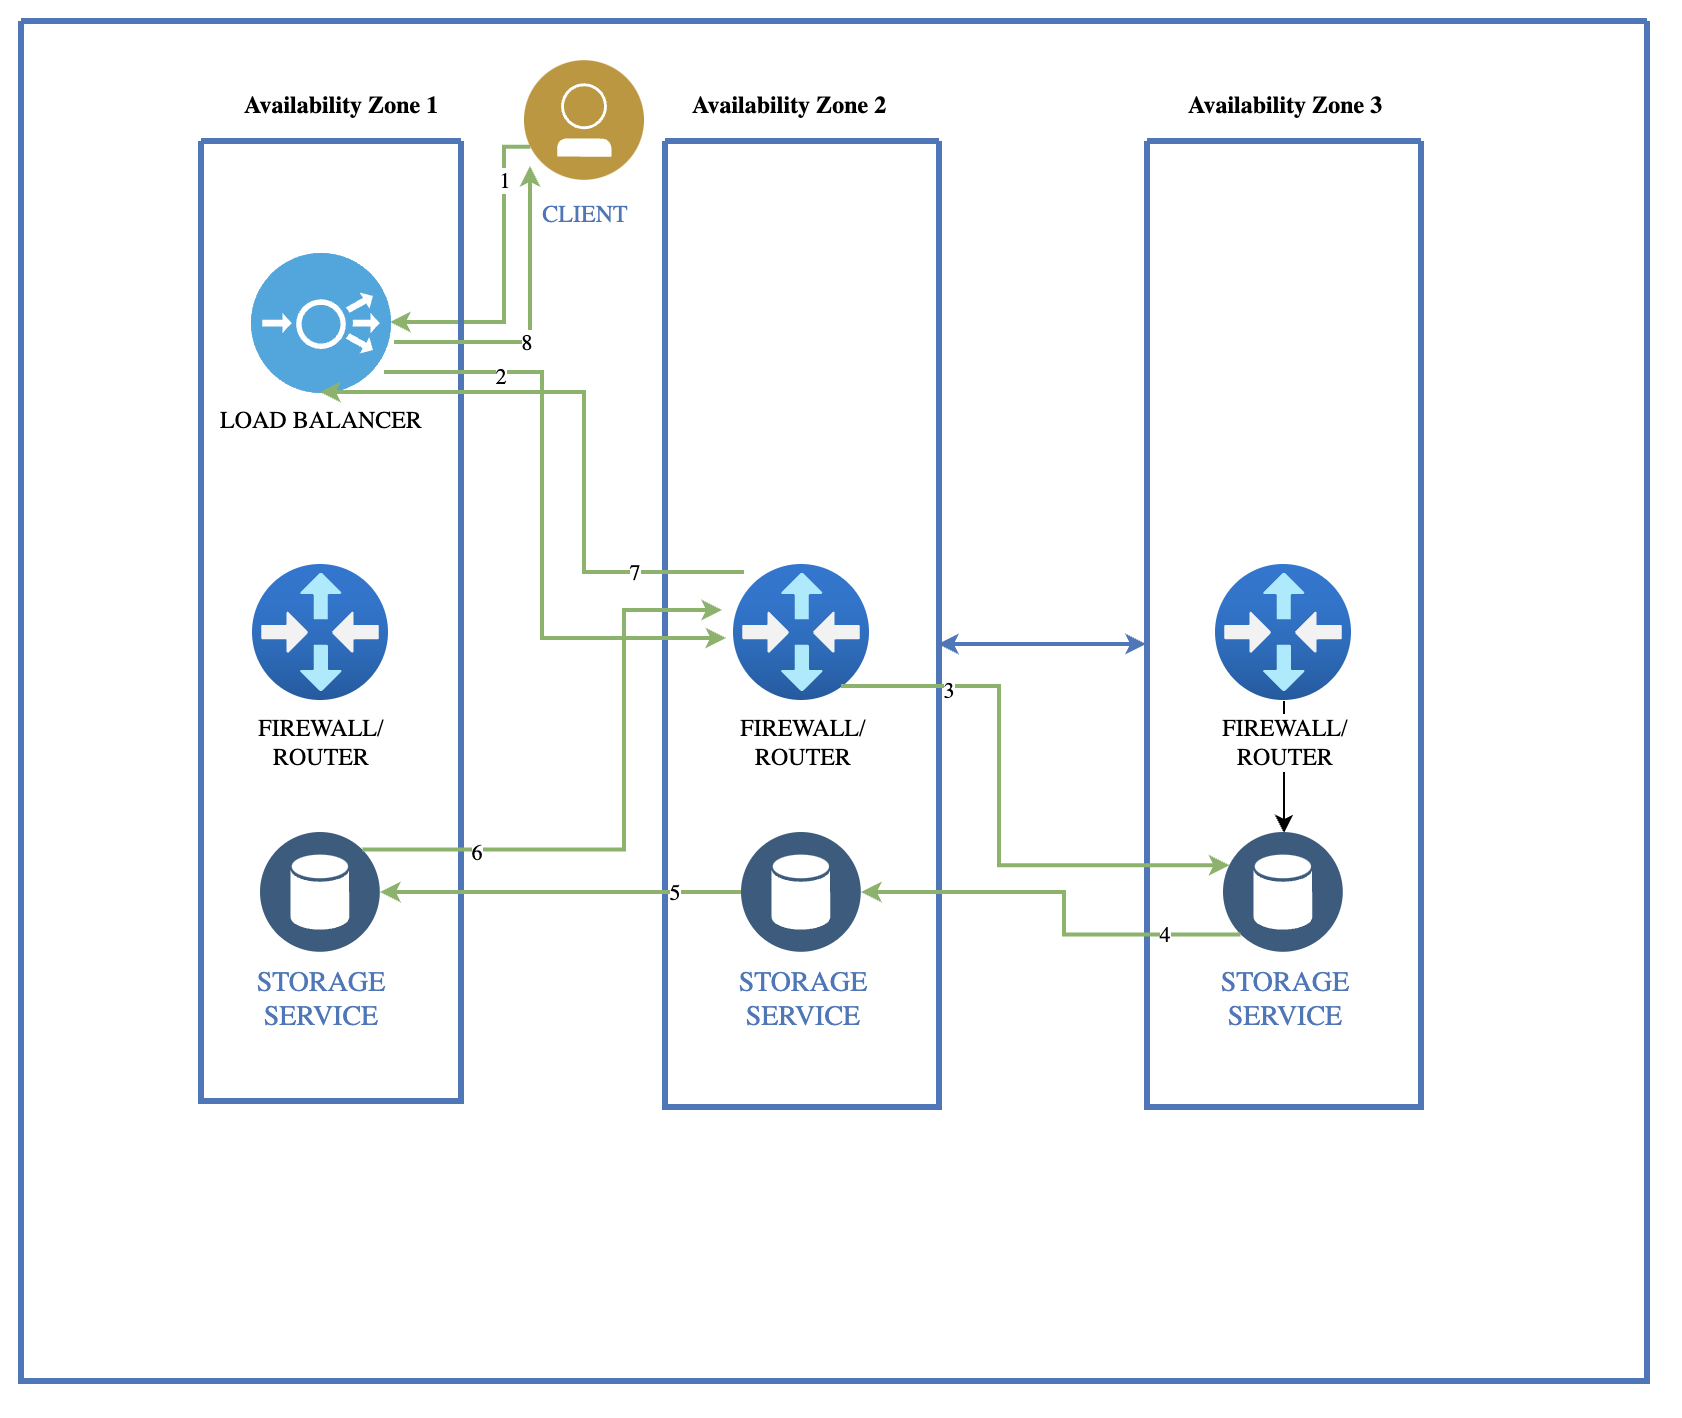 The NeverNeverEver (NNE) service provides a redundant storage platform for cloud customers and services. Store requests first go through to a load balancer that distributes requests evenly across all the zones in use.